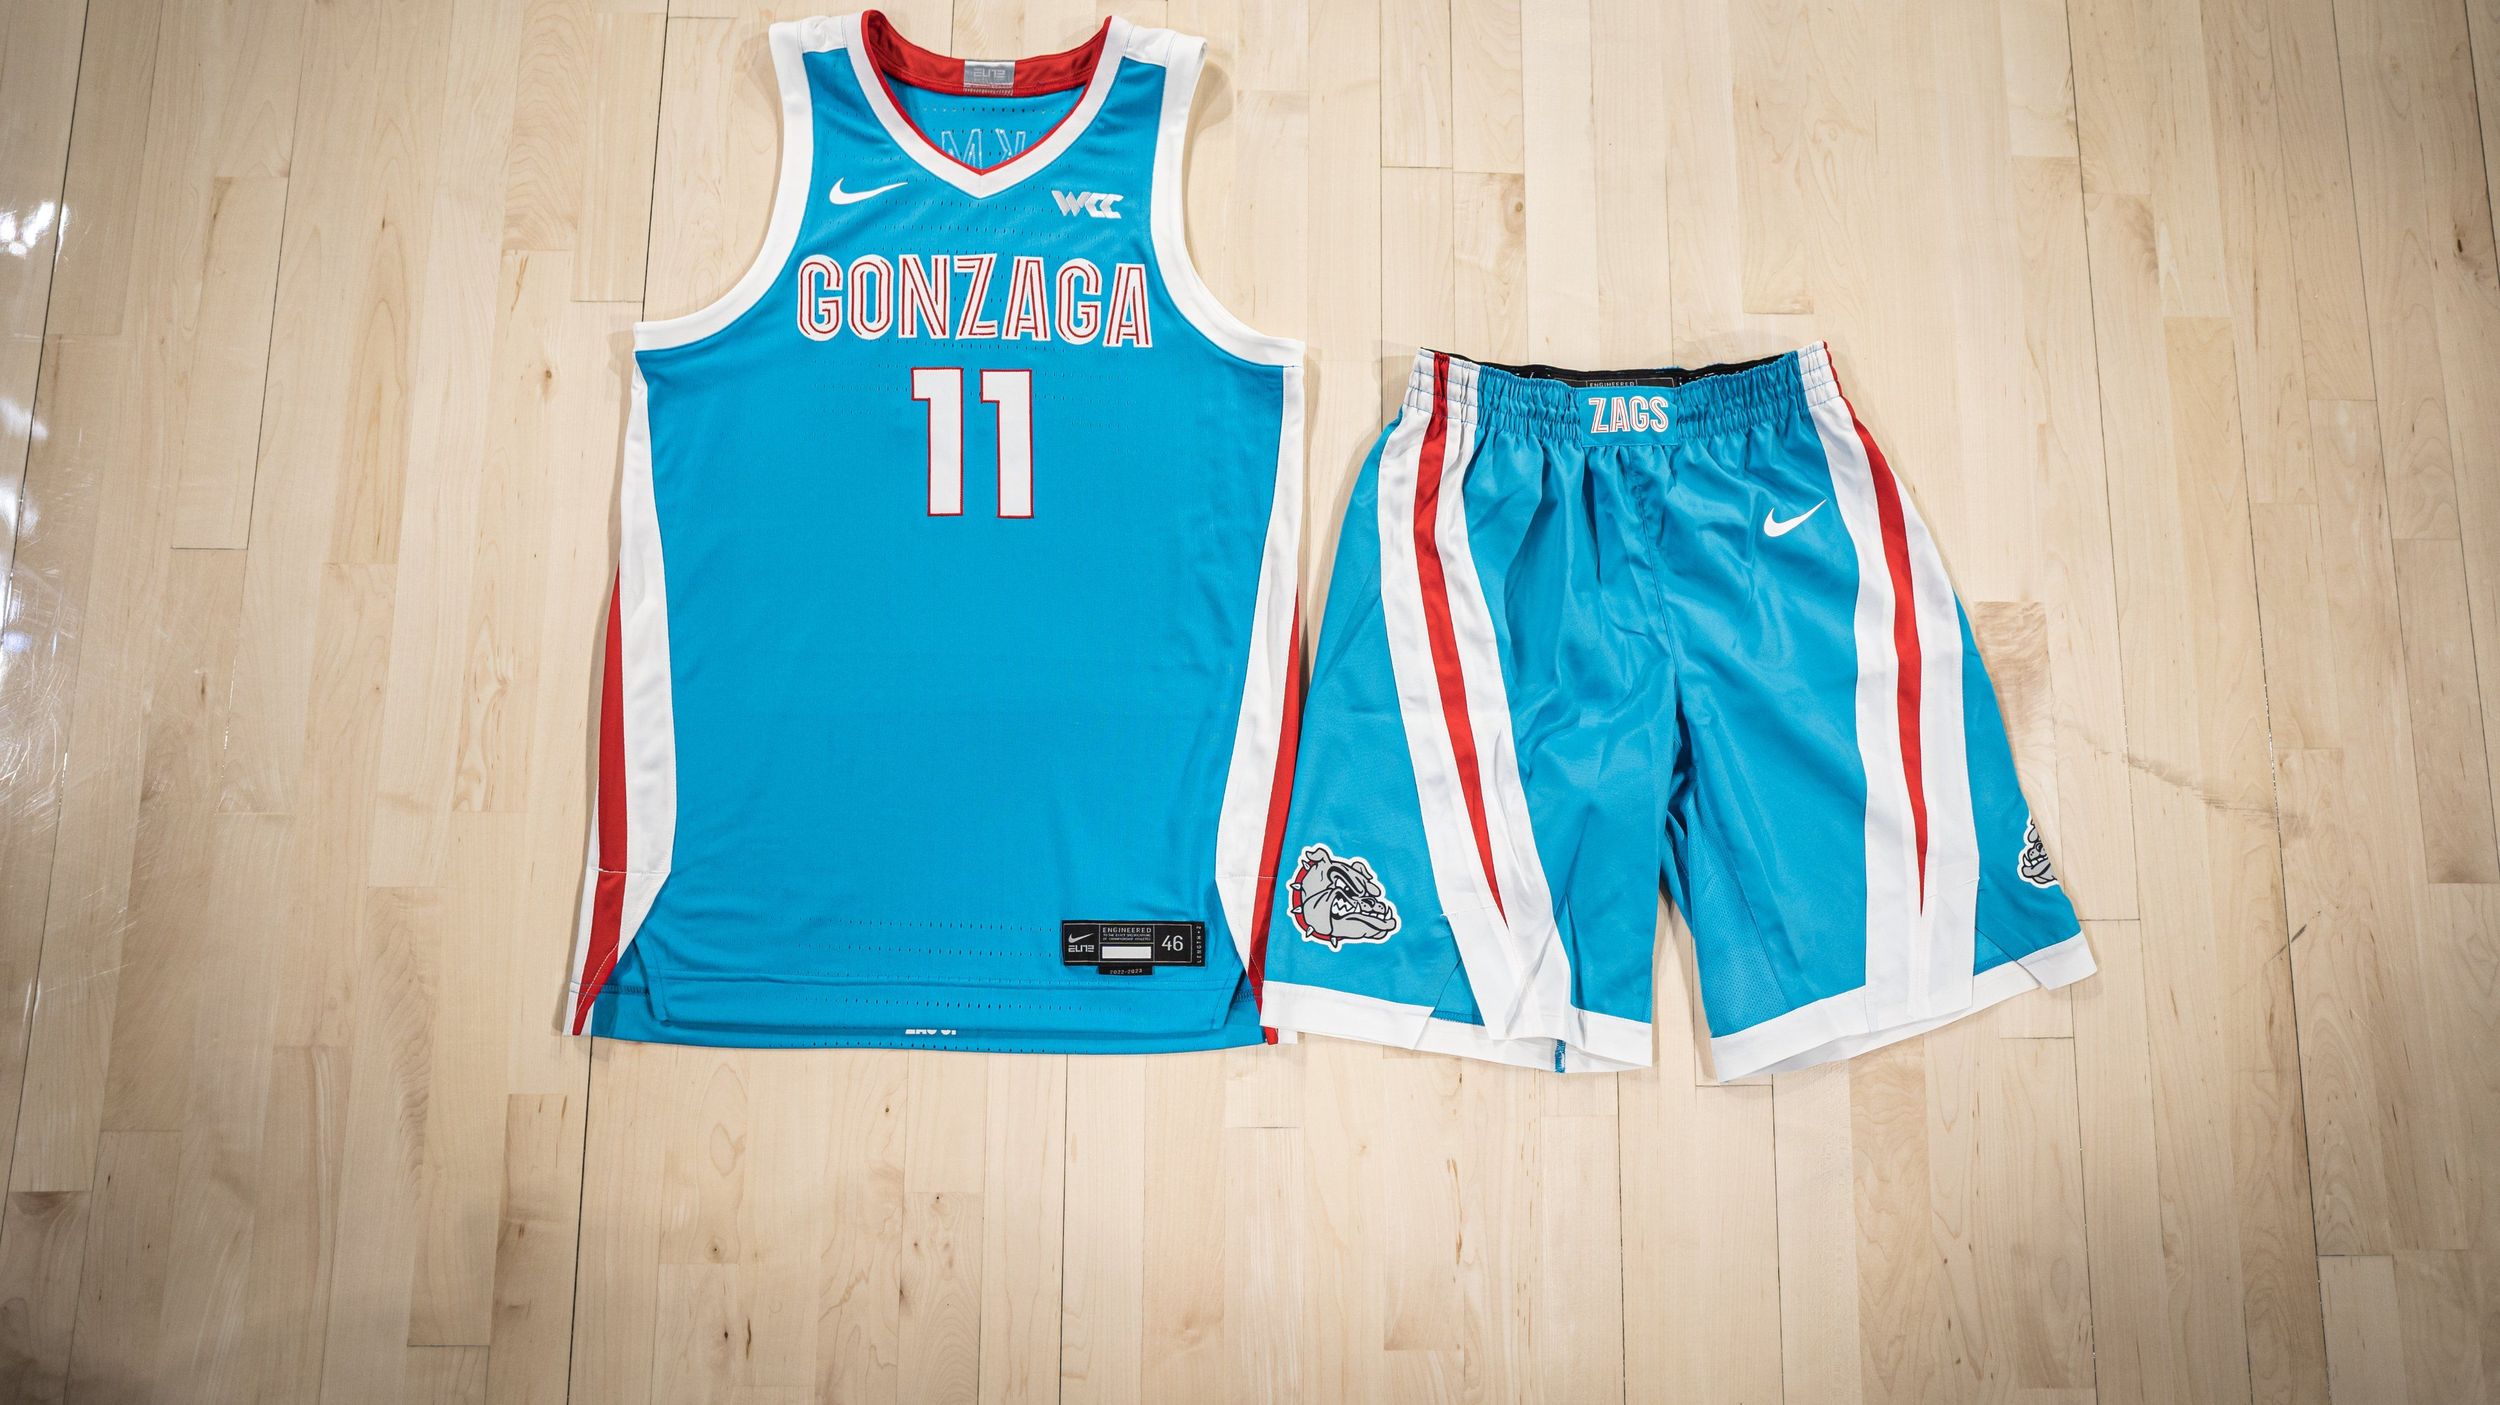 Nike Outfits Nine Schools in N7 Jerseys for Native American